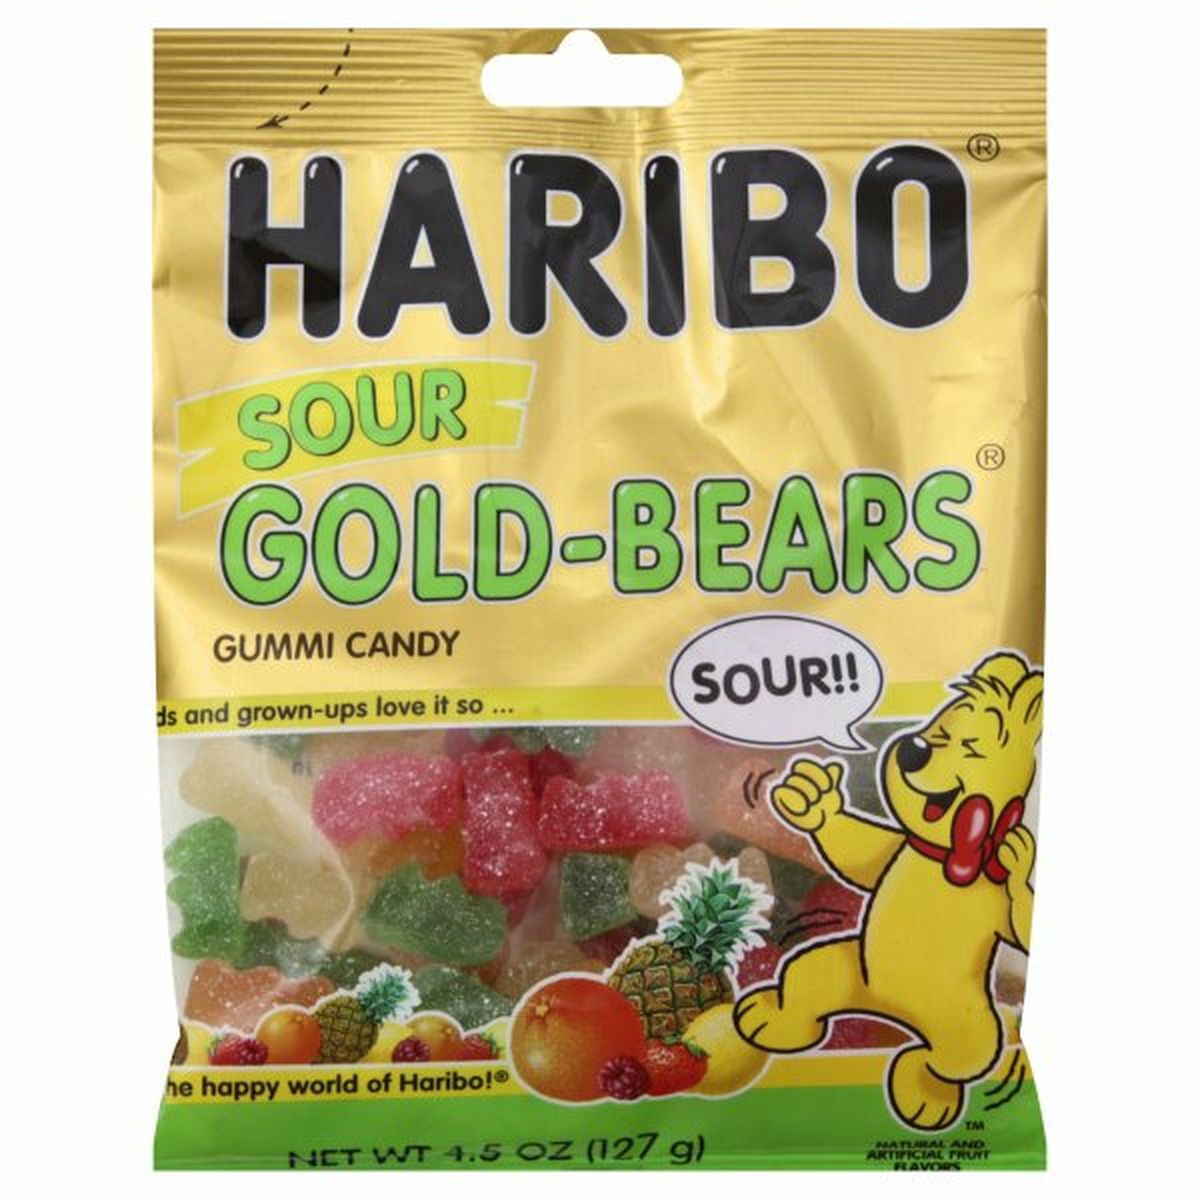 Calories in HARIBO Candy, Gummi, Sour